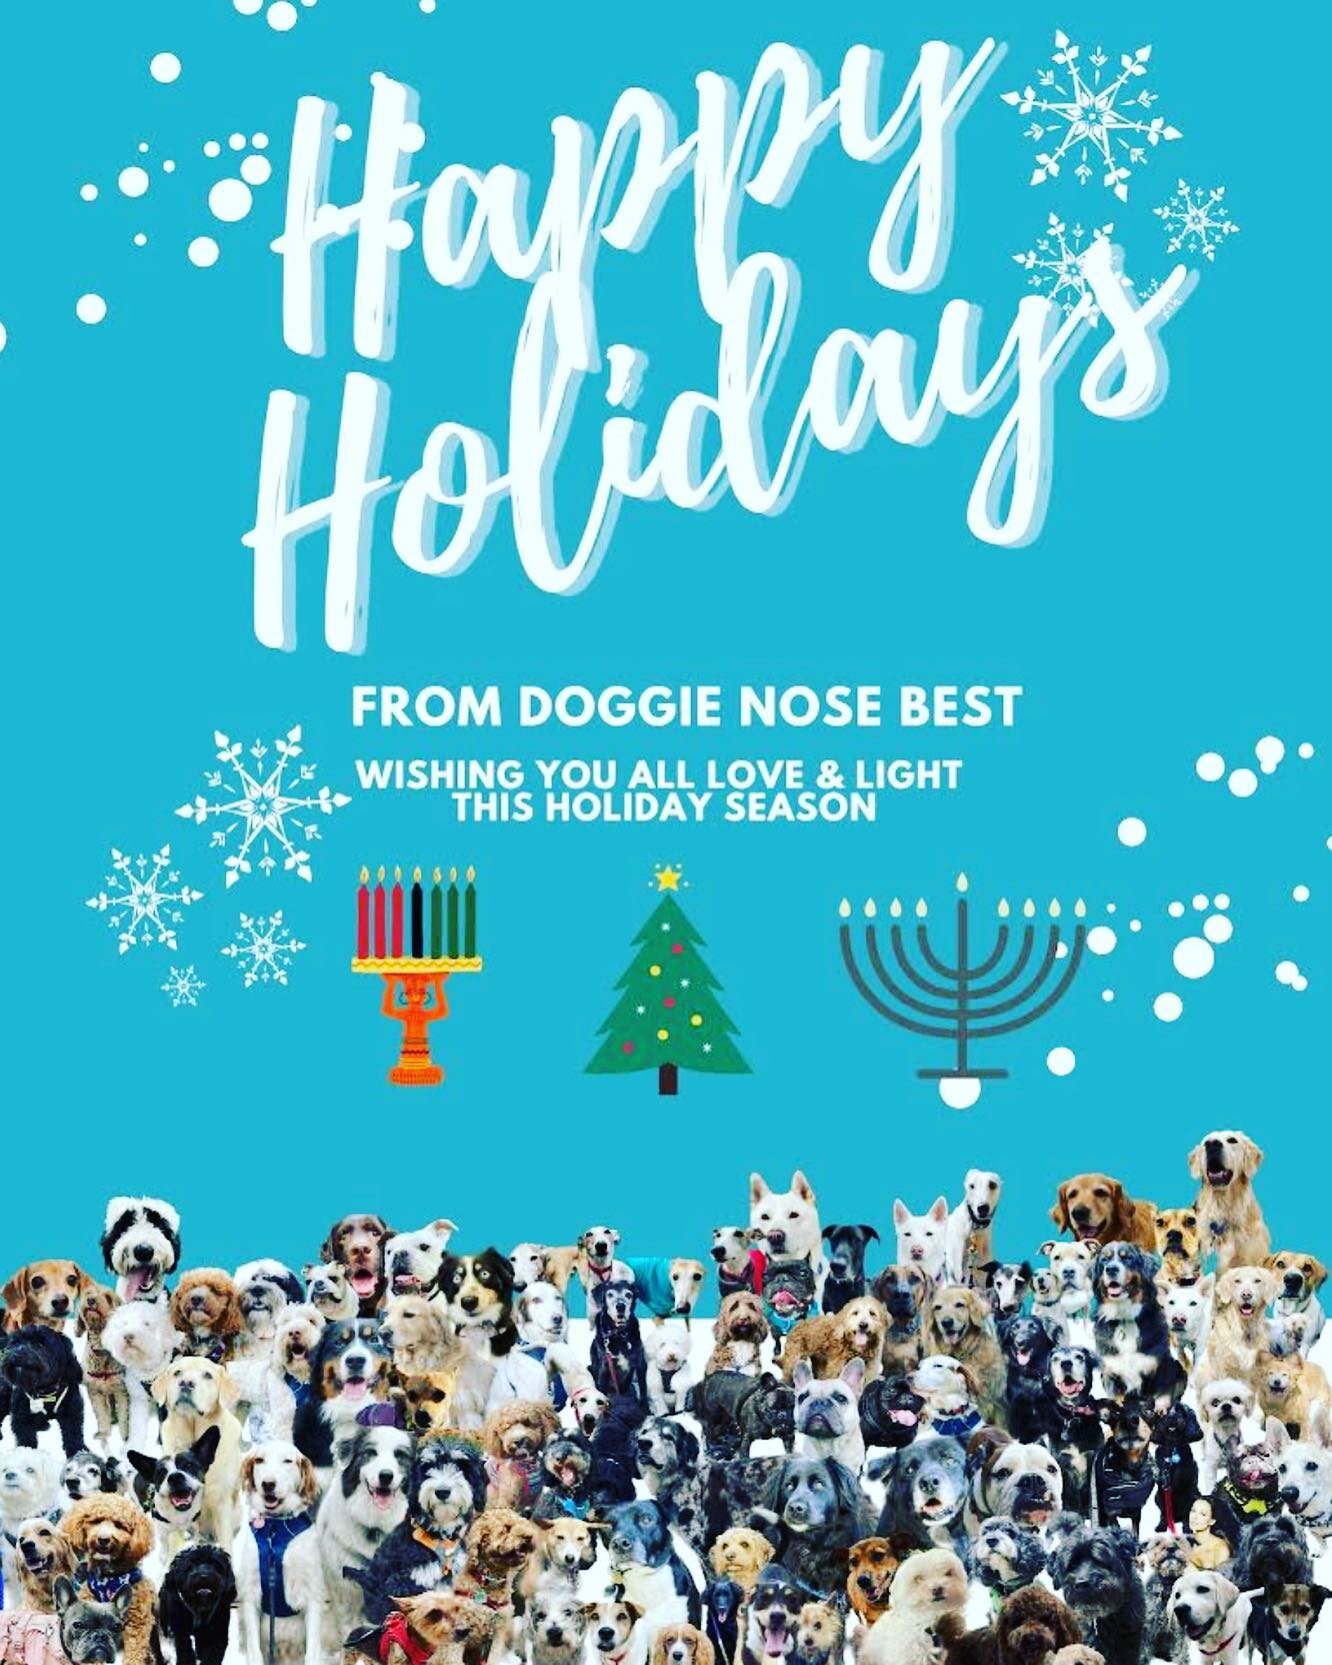 Wishing you and your loved ones a pawfect holiday season! #doggienosebest #dogs #lovemyjob #womansbestfriend #blessedwiththebest #hottothetouch #dogsofnyc #dogs #pups #dogsofnewyork #dogoftheday #dogsofinstagram #homies #dogfriends #hanging #vibing #